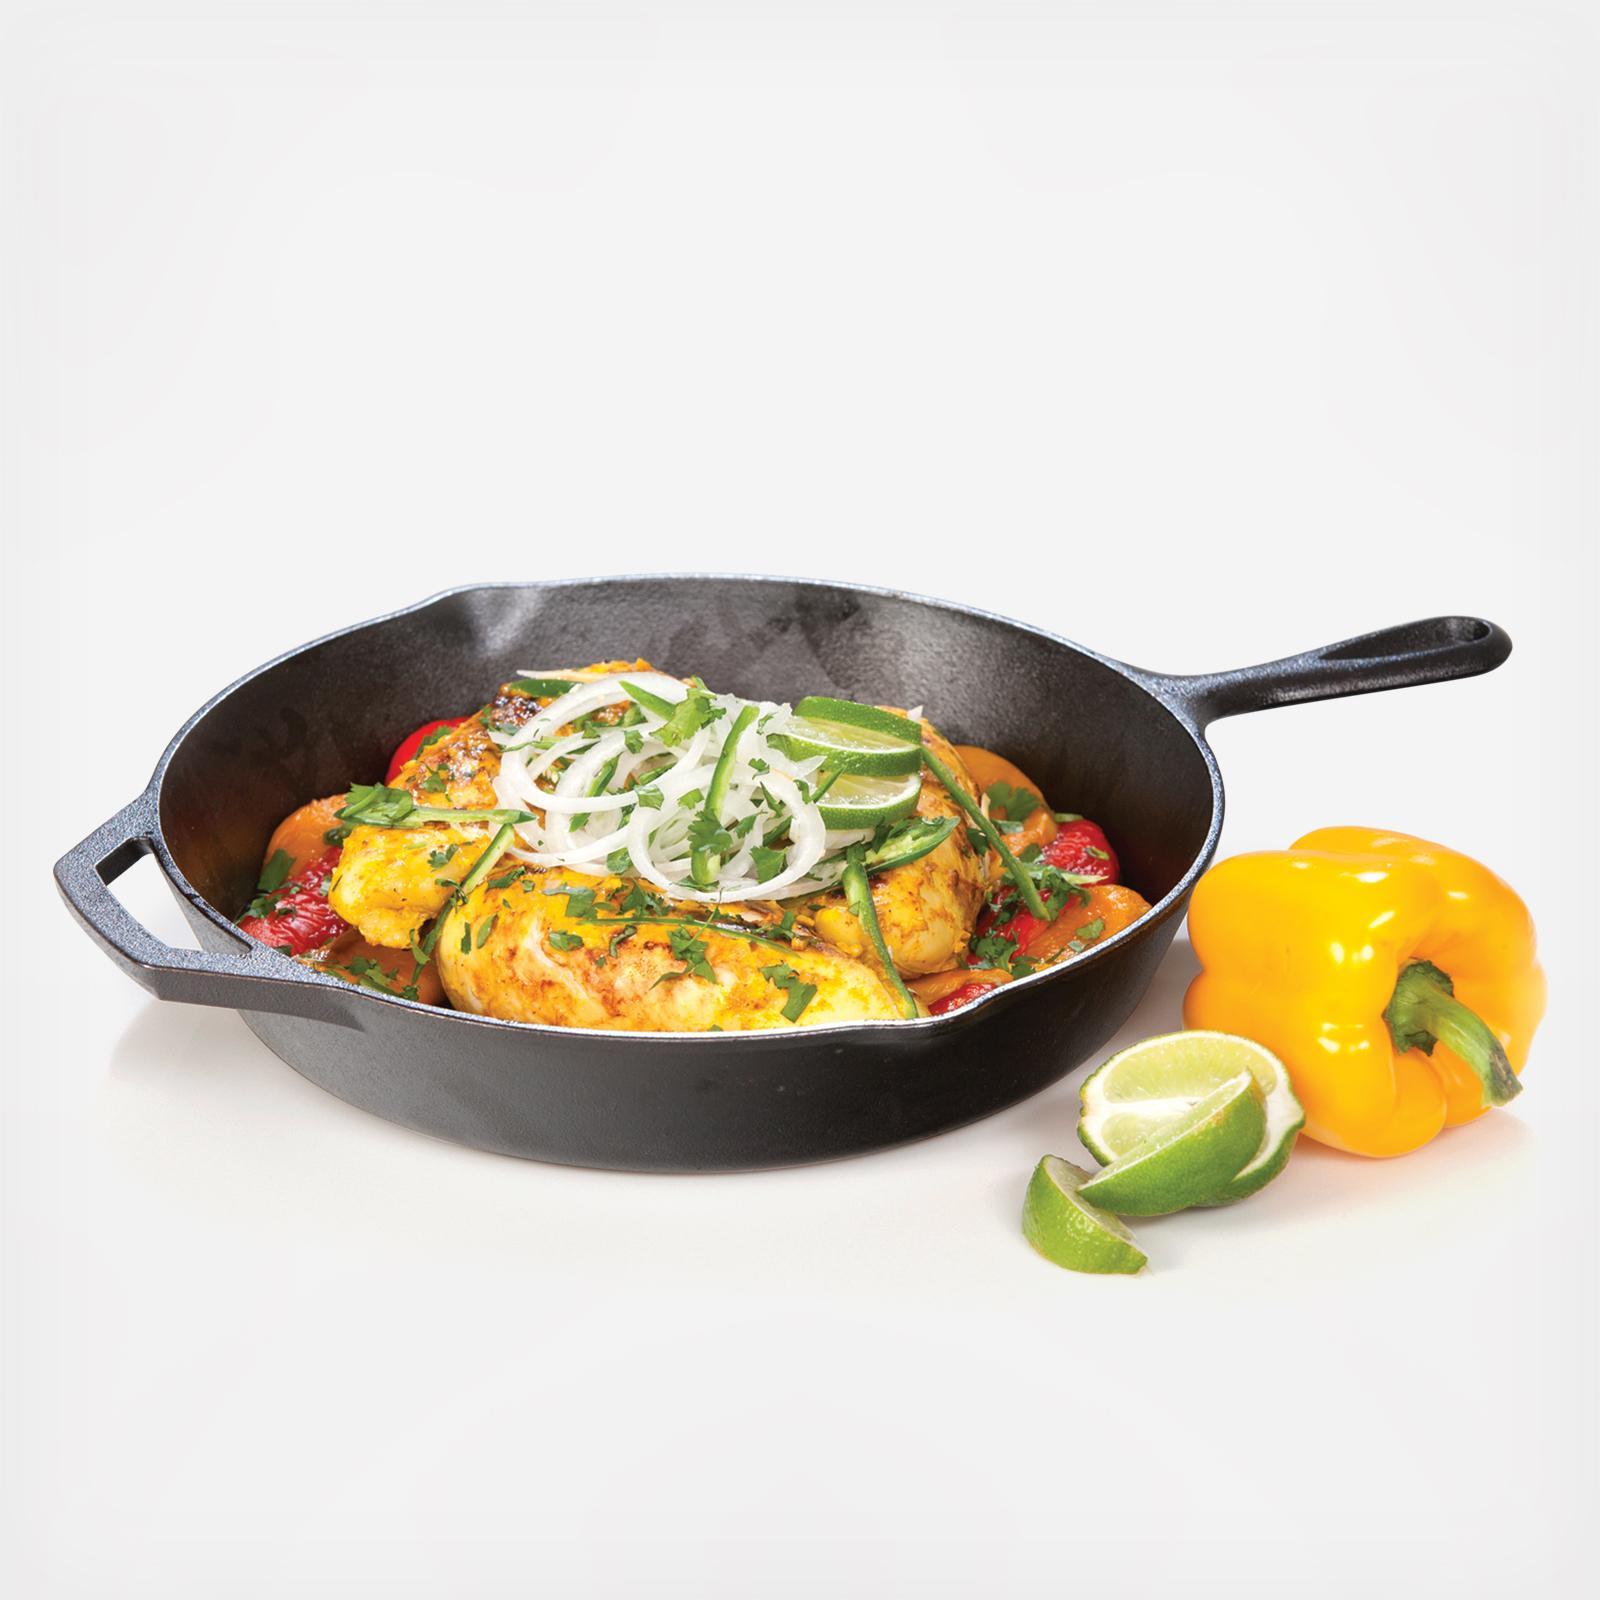 Lodge 10.25-in. Seasoned Cast-Iron Baker's Skillet with Silicone Grips